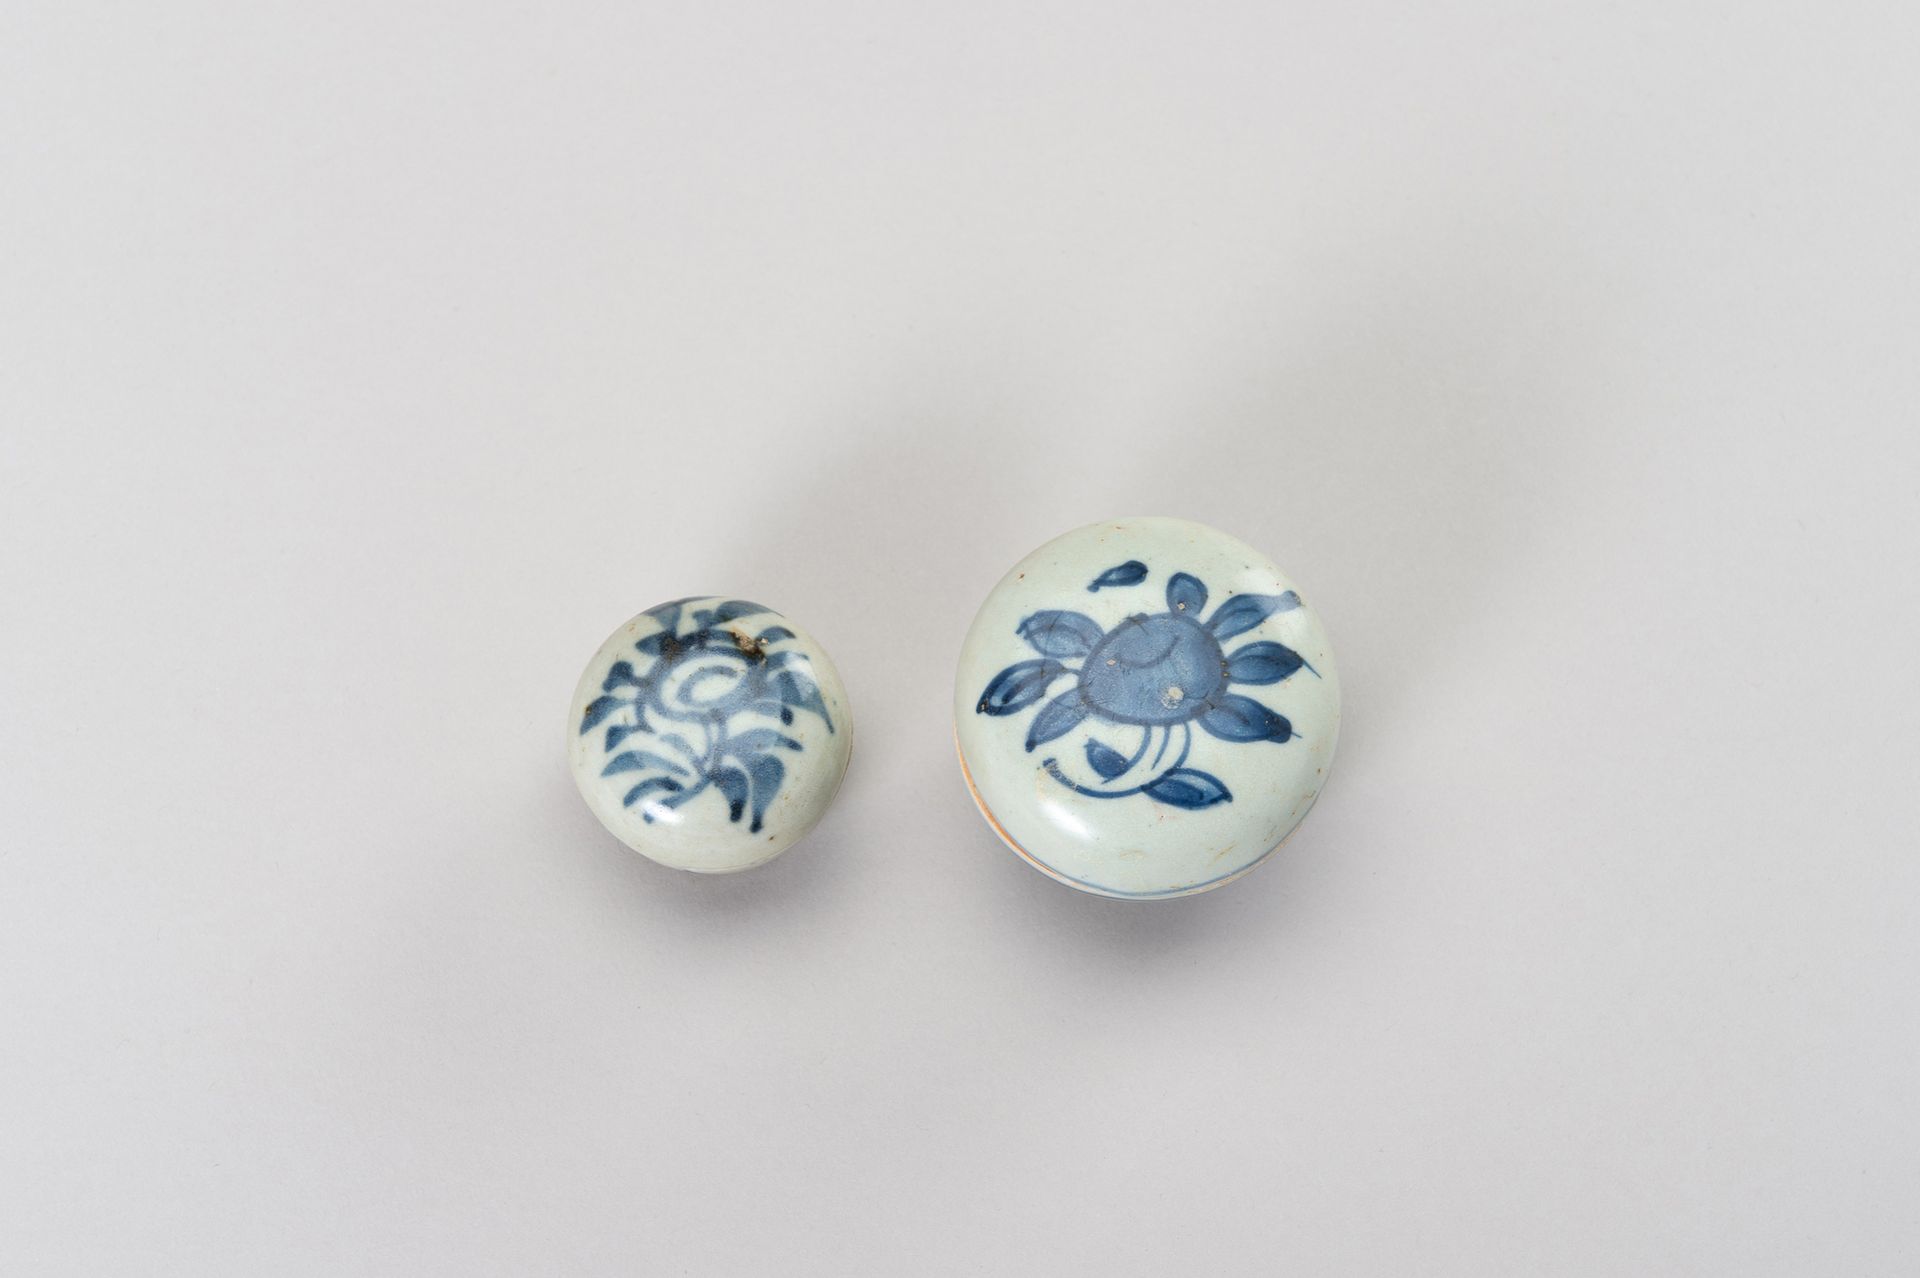 A SET OF TWO SMALL BLUE AND WHITE PORCELAIN BOXES 一套蓝色和白色的小瓷盒
中国，明朝（1368-1644）。较&hellip;